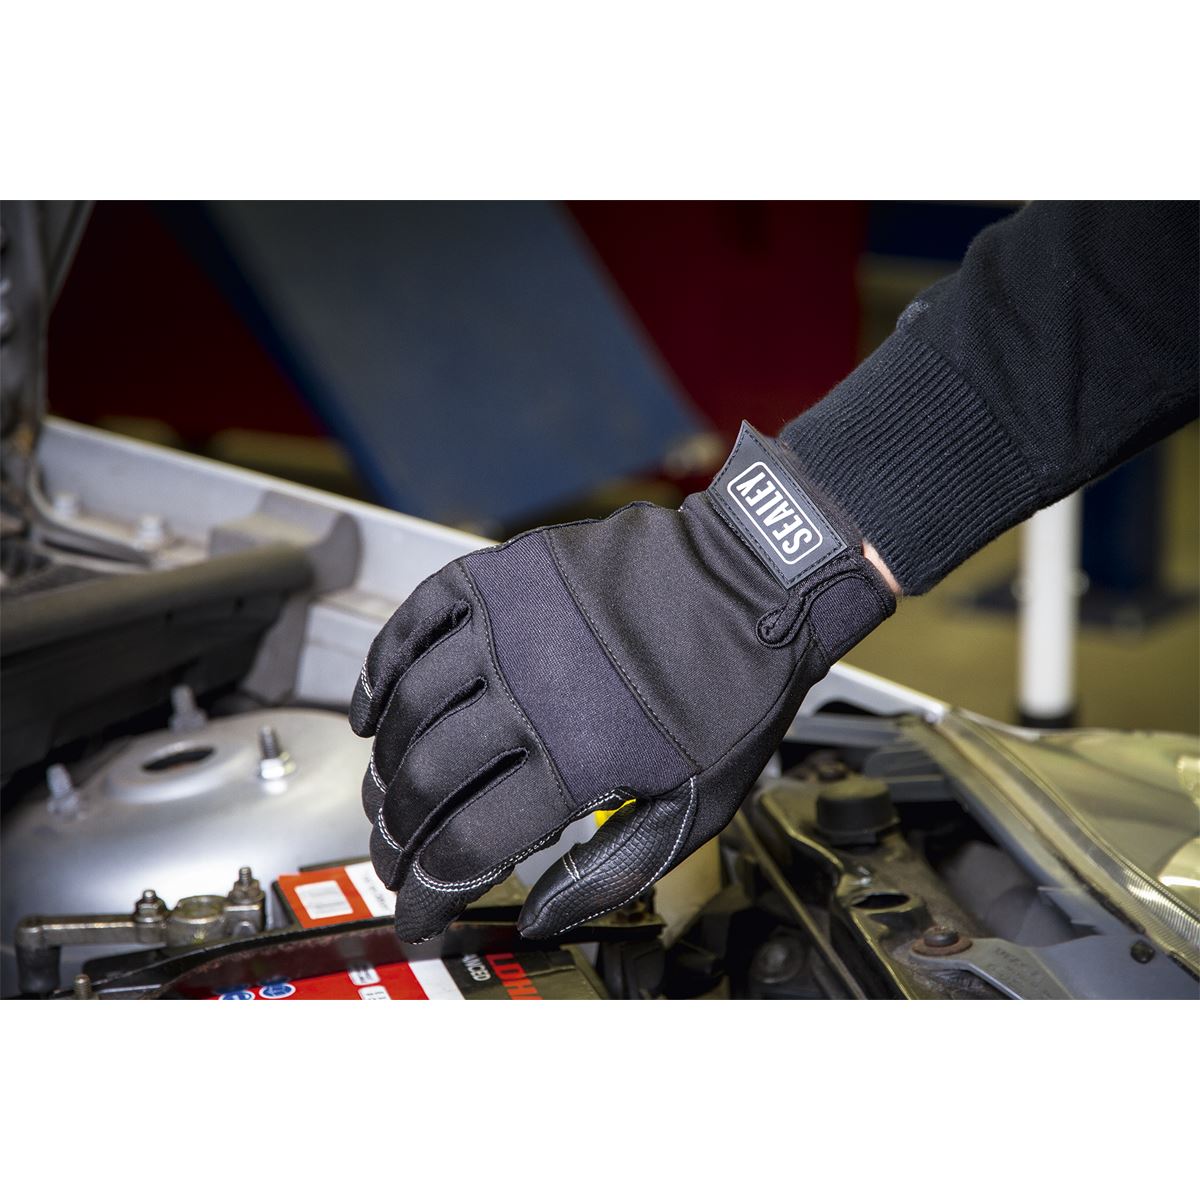 Sealey Premier Mechanic's Gloves Light Palm Tactouch - Large